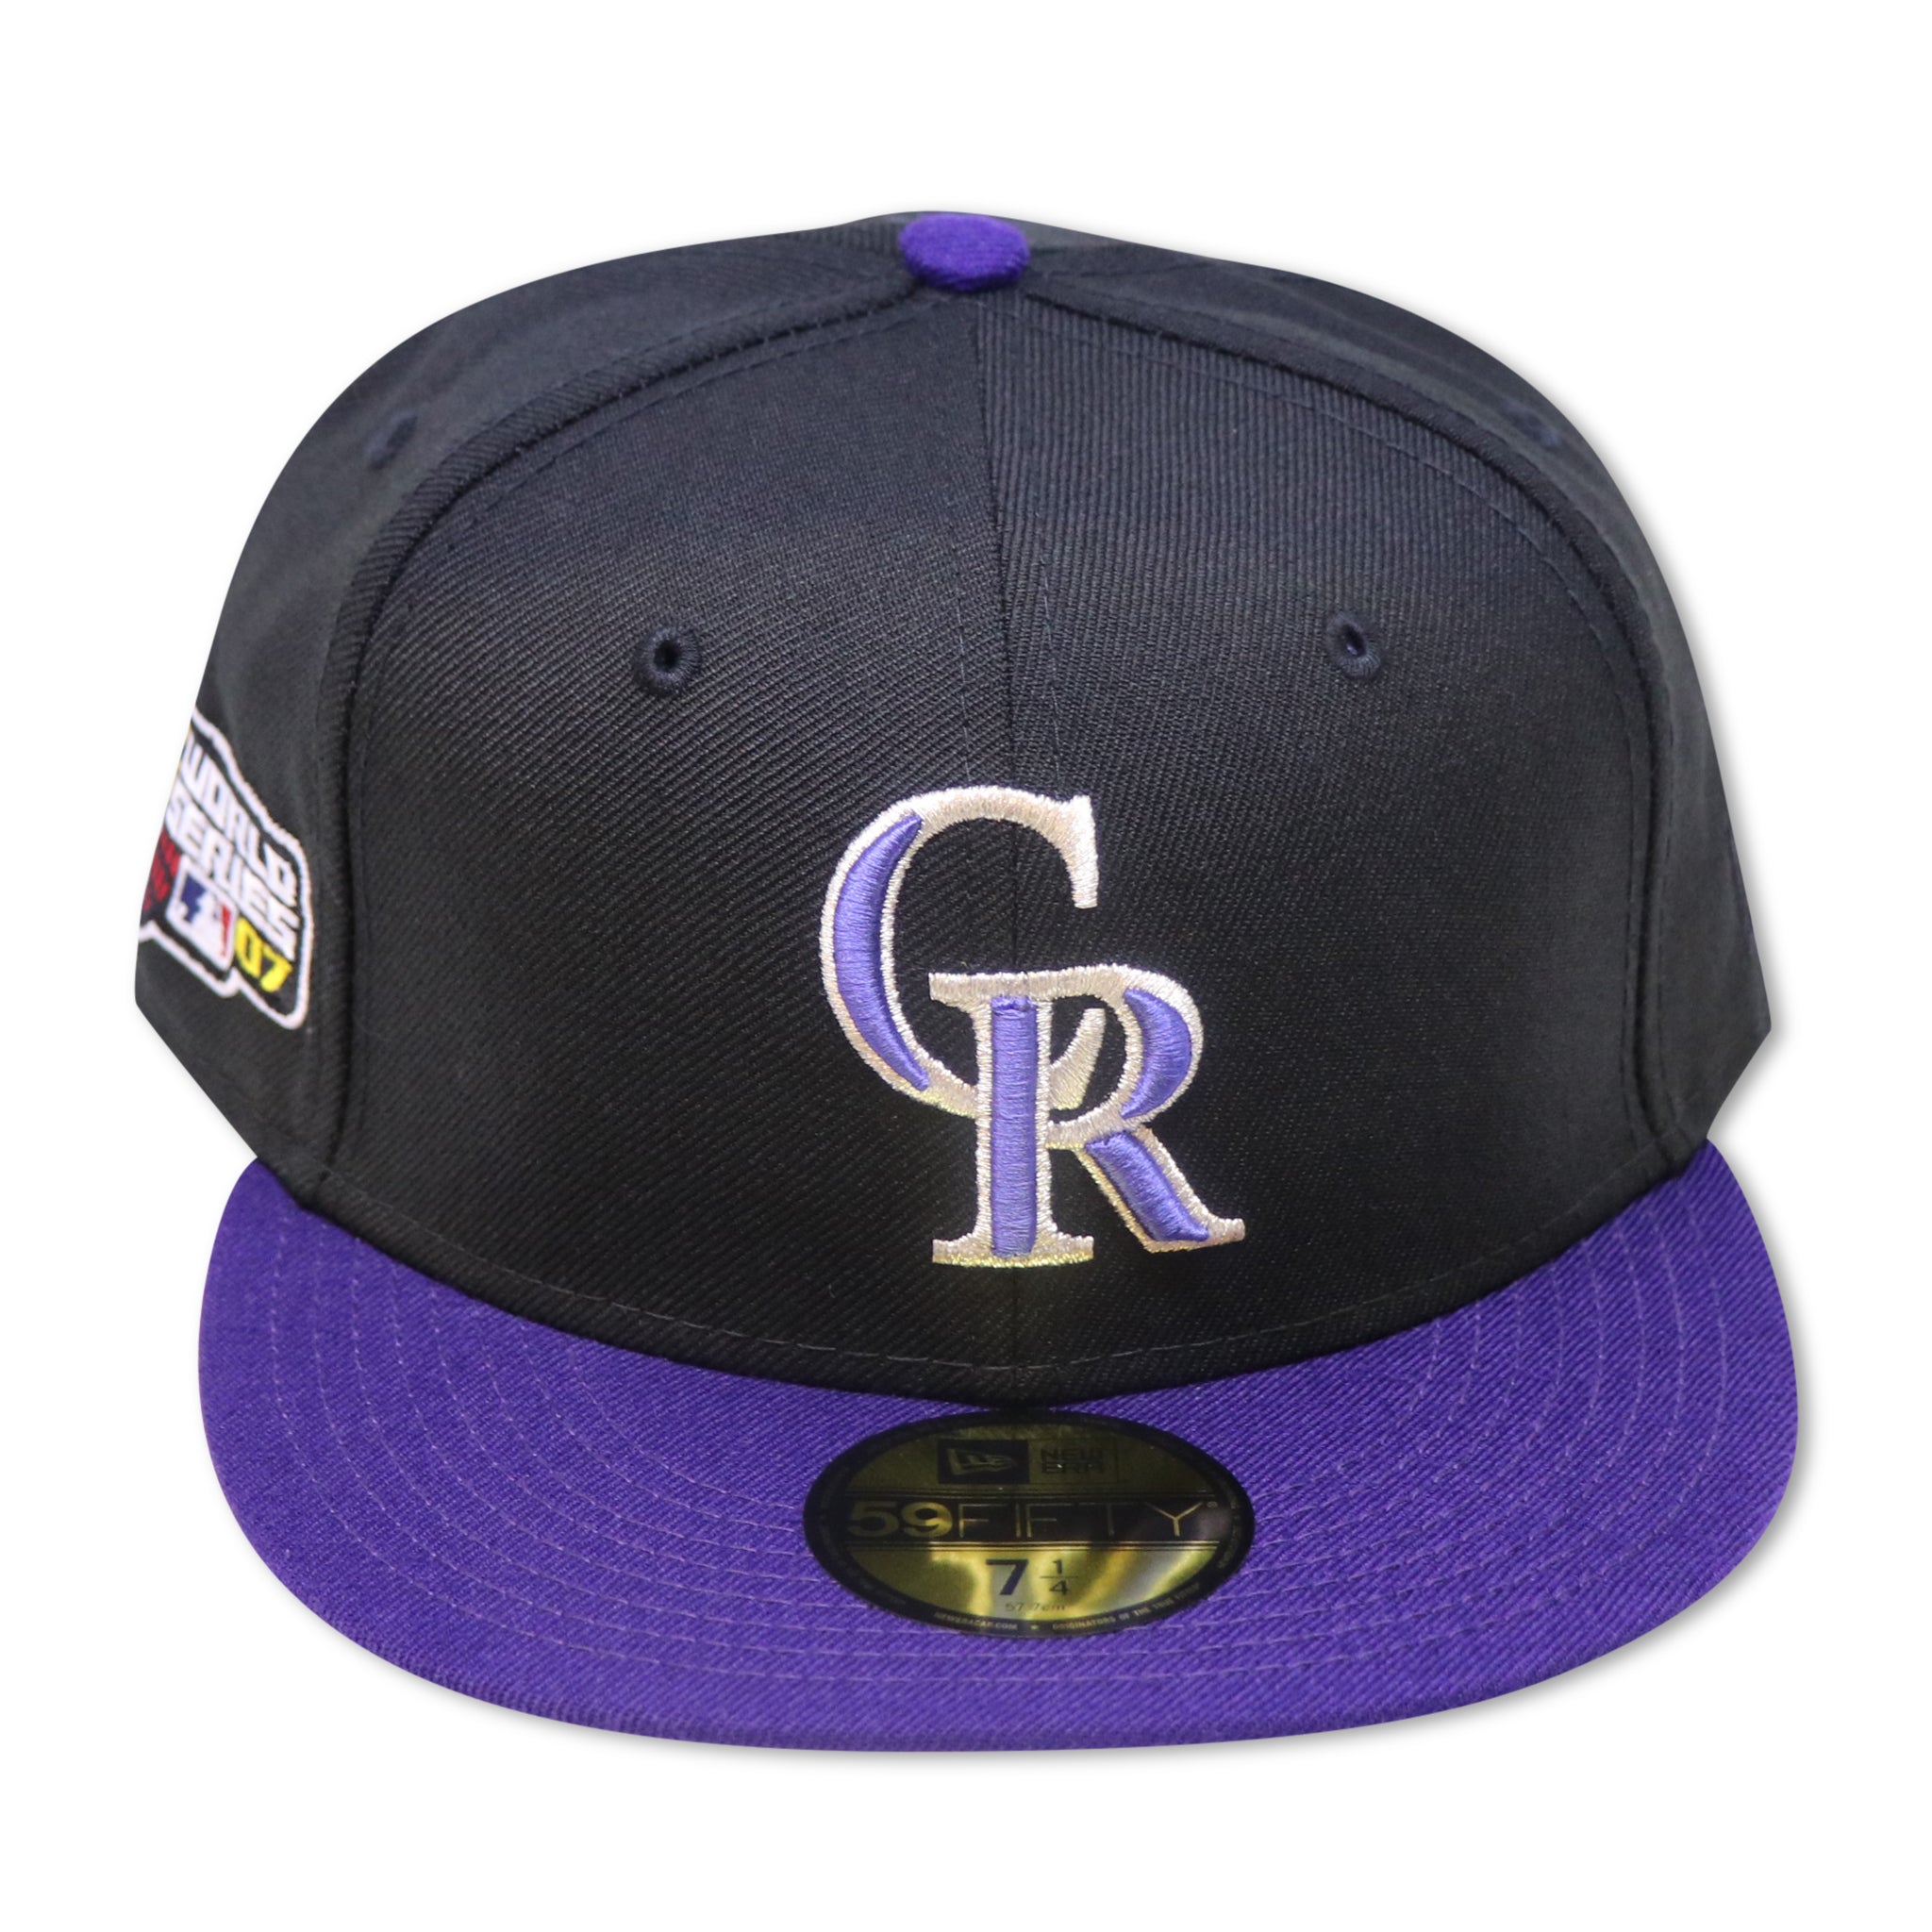 Big League Chew Rockies fitted. : r/neweracaps